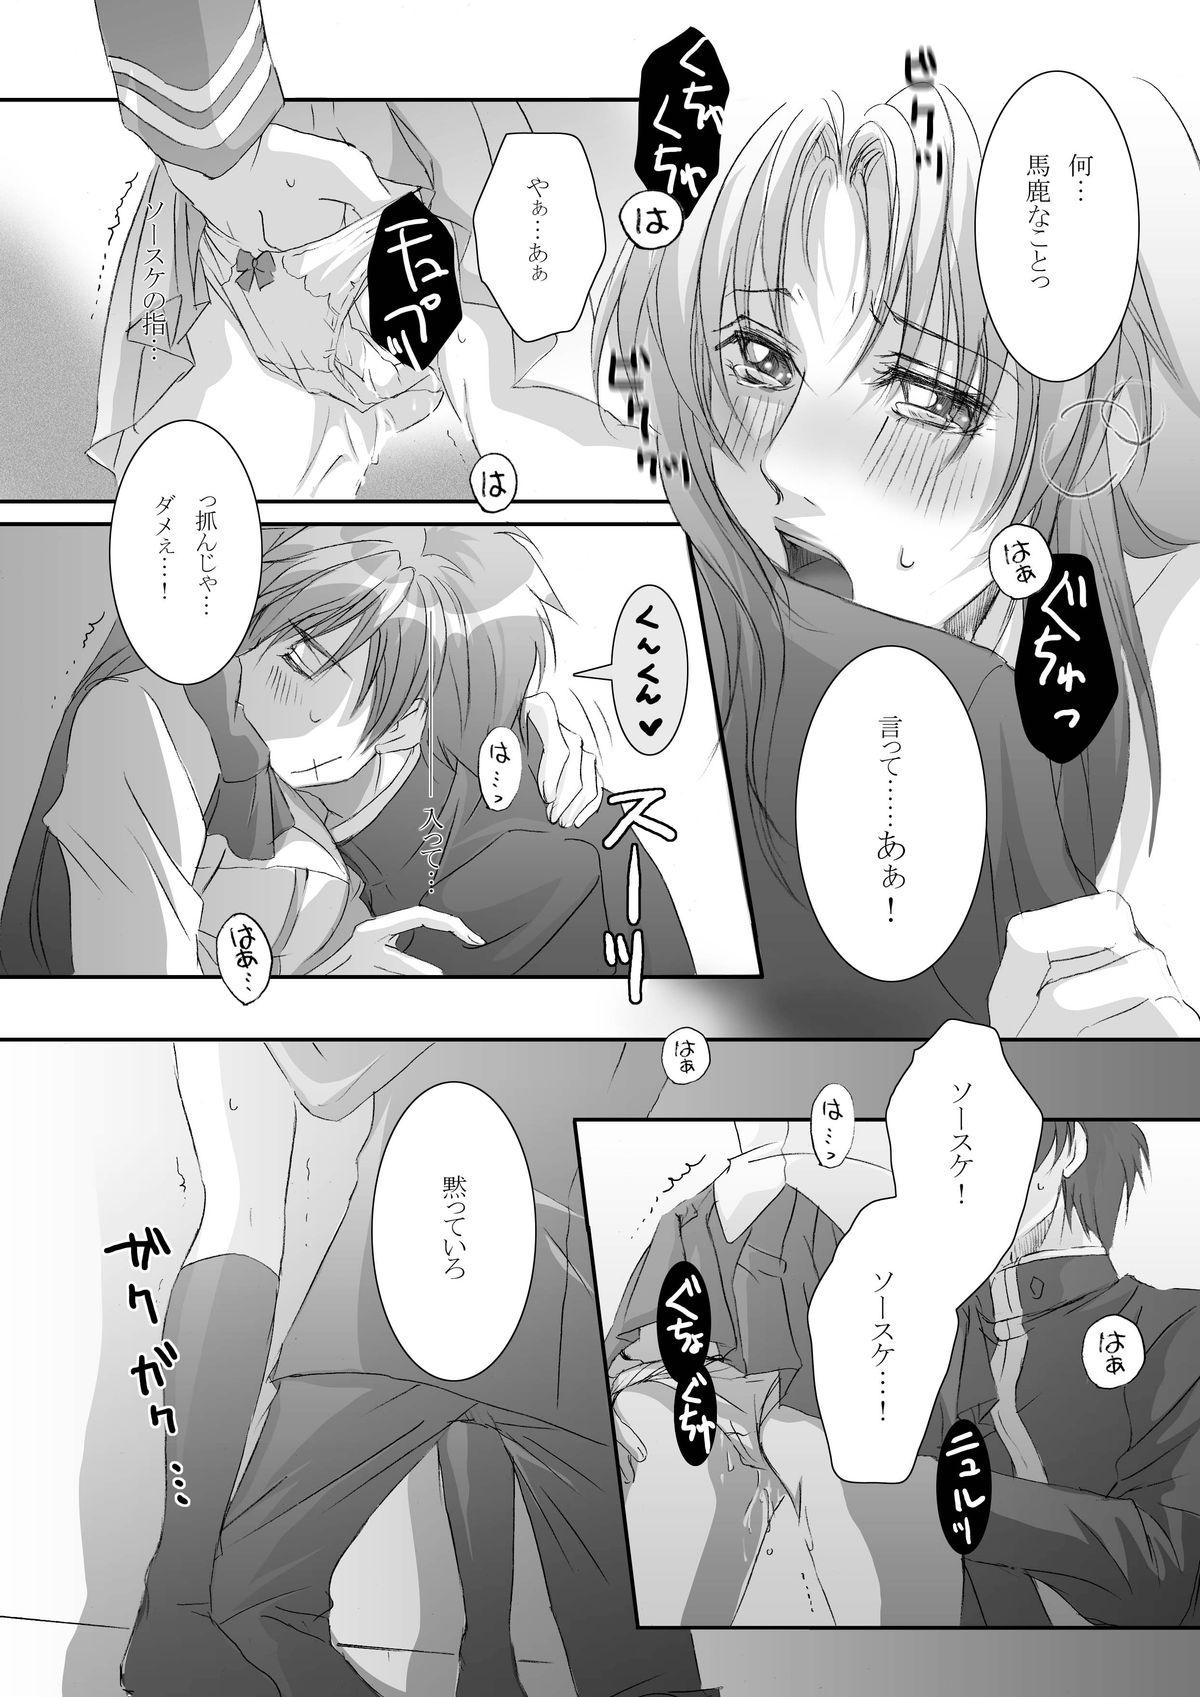 Messy Anjel Seven A7 - Full metal panic Hot Girl Fuck - Page 11